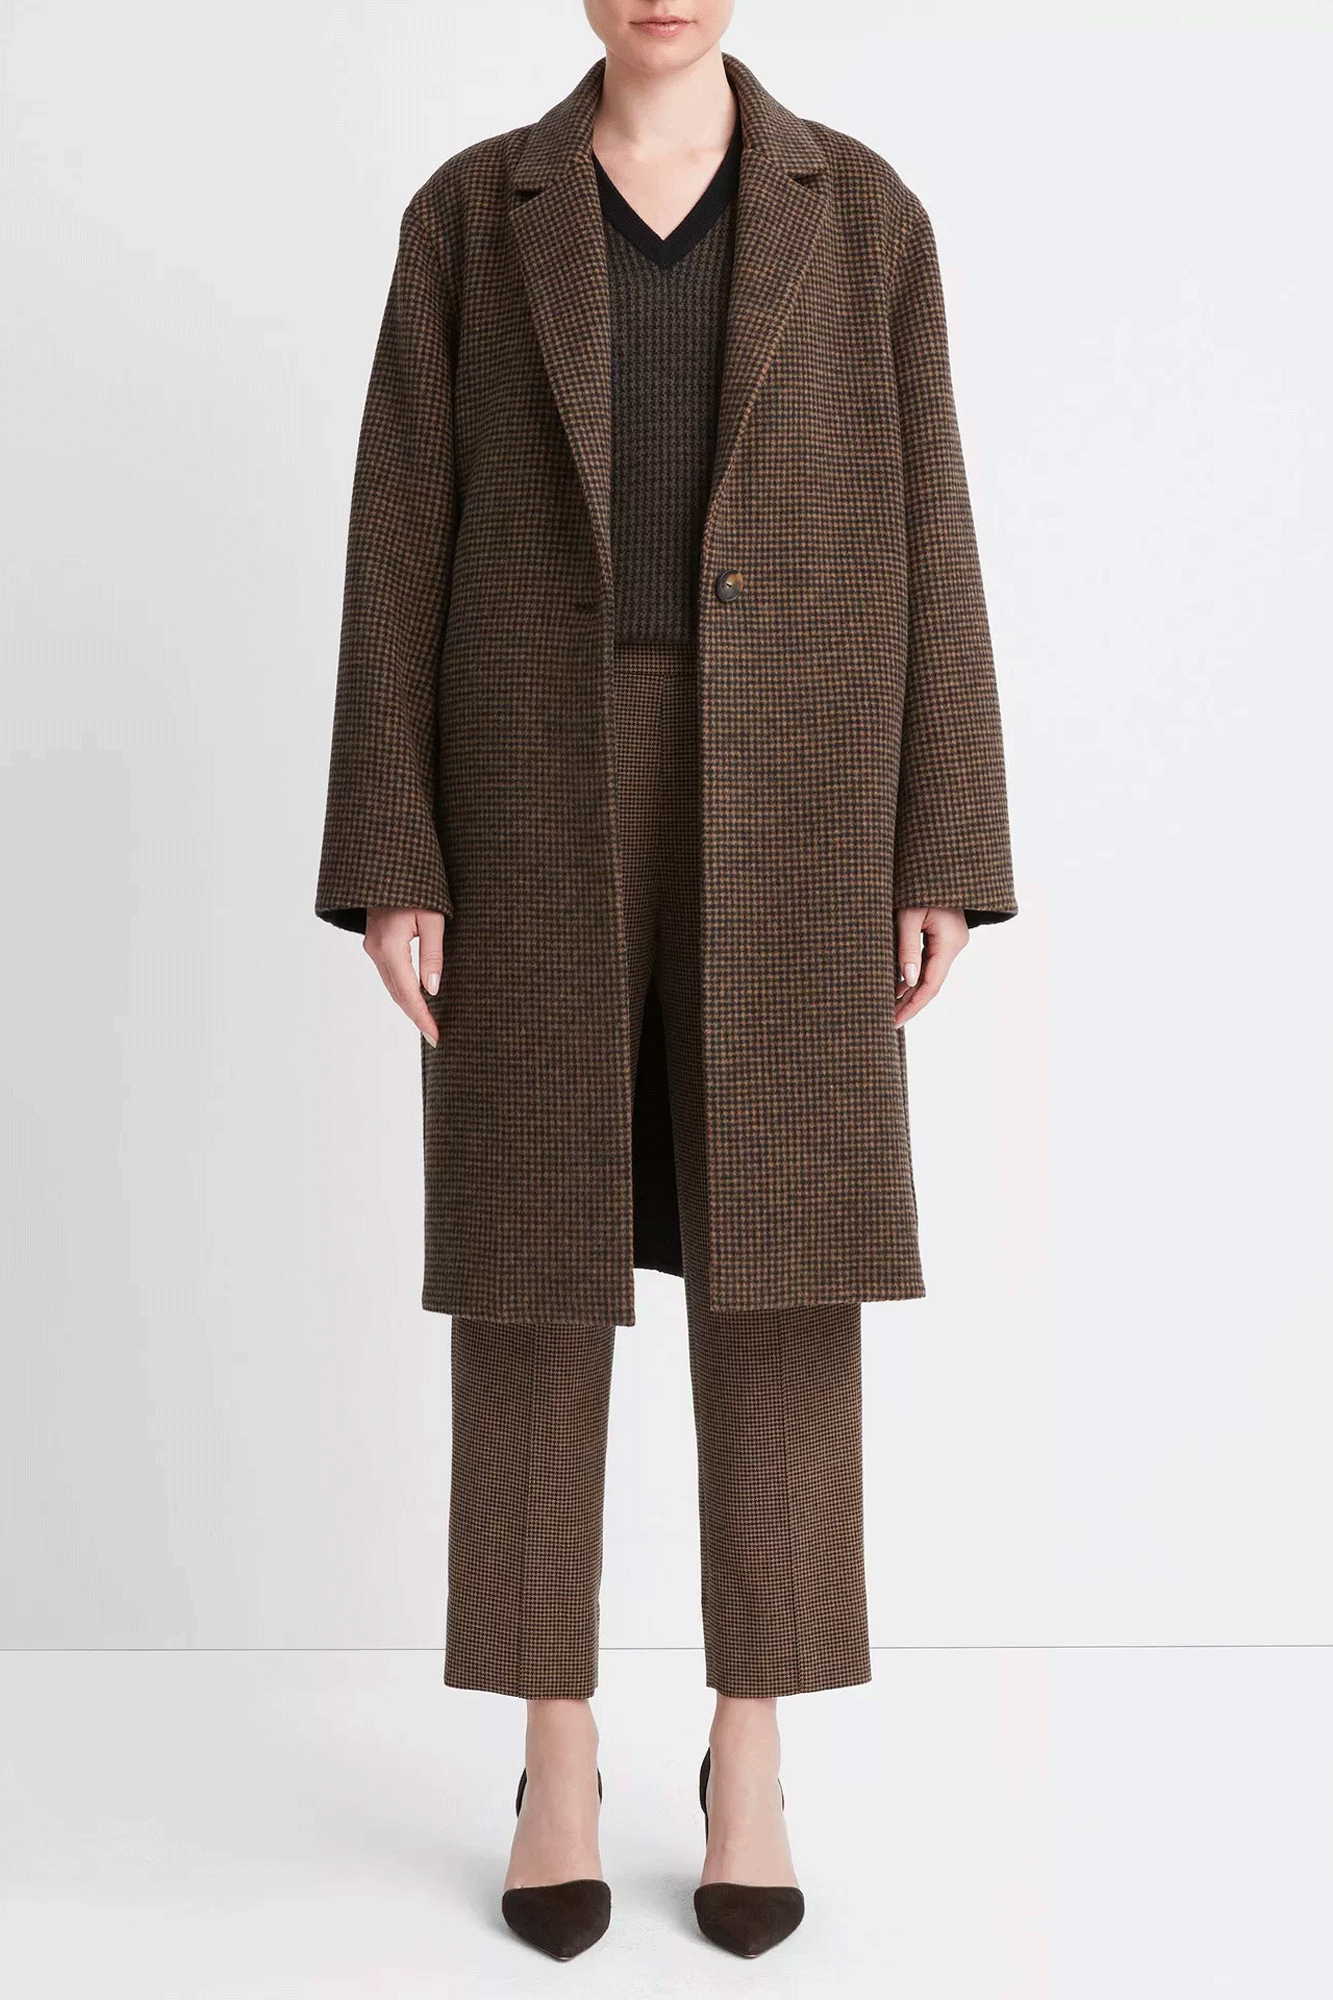 The Houndstooth Long Coat from Vince is crafted from an Italian recycled wool blend, making for a warm, stylish piece. It features a timeless houndstooth pattern, single-breasted button-front closure, faux horn buttons, on-seam pockets, and a felted undercollar for an elegant finish. Keep cosy and stylish in this beautifully designed coat.